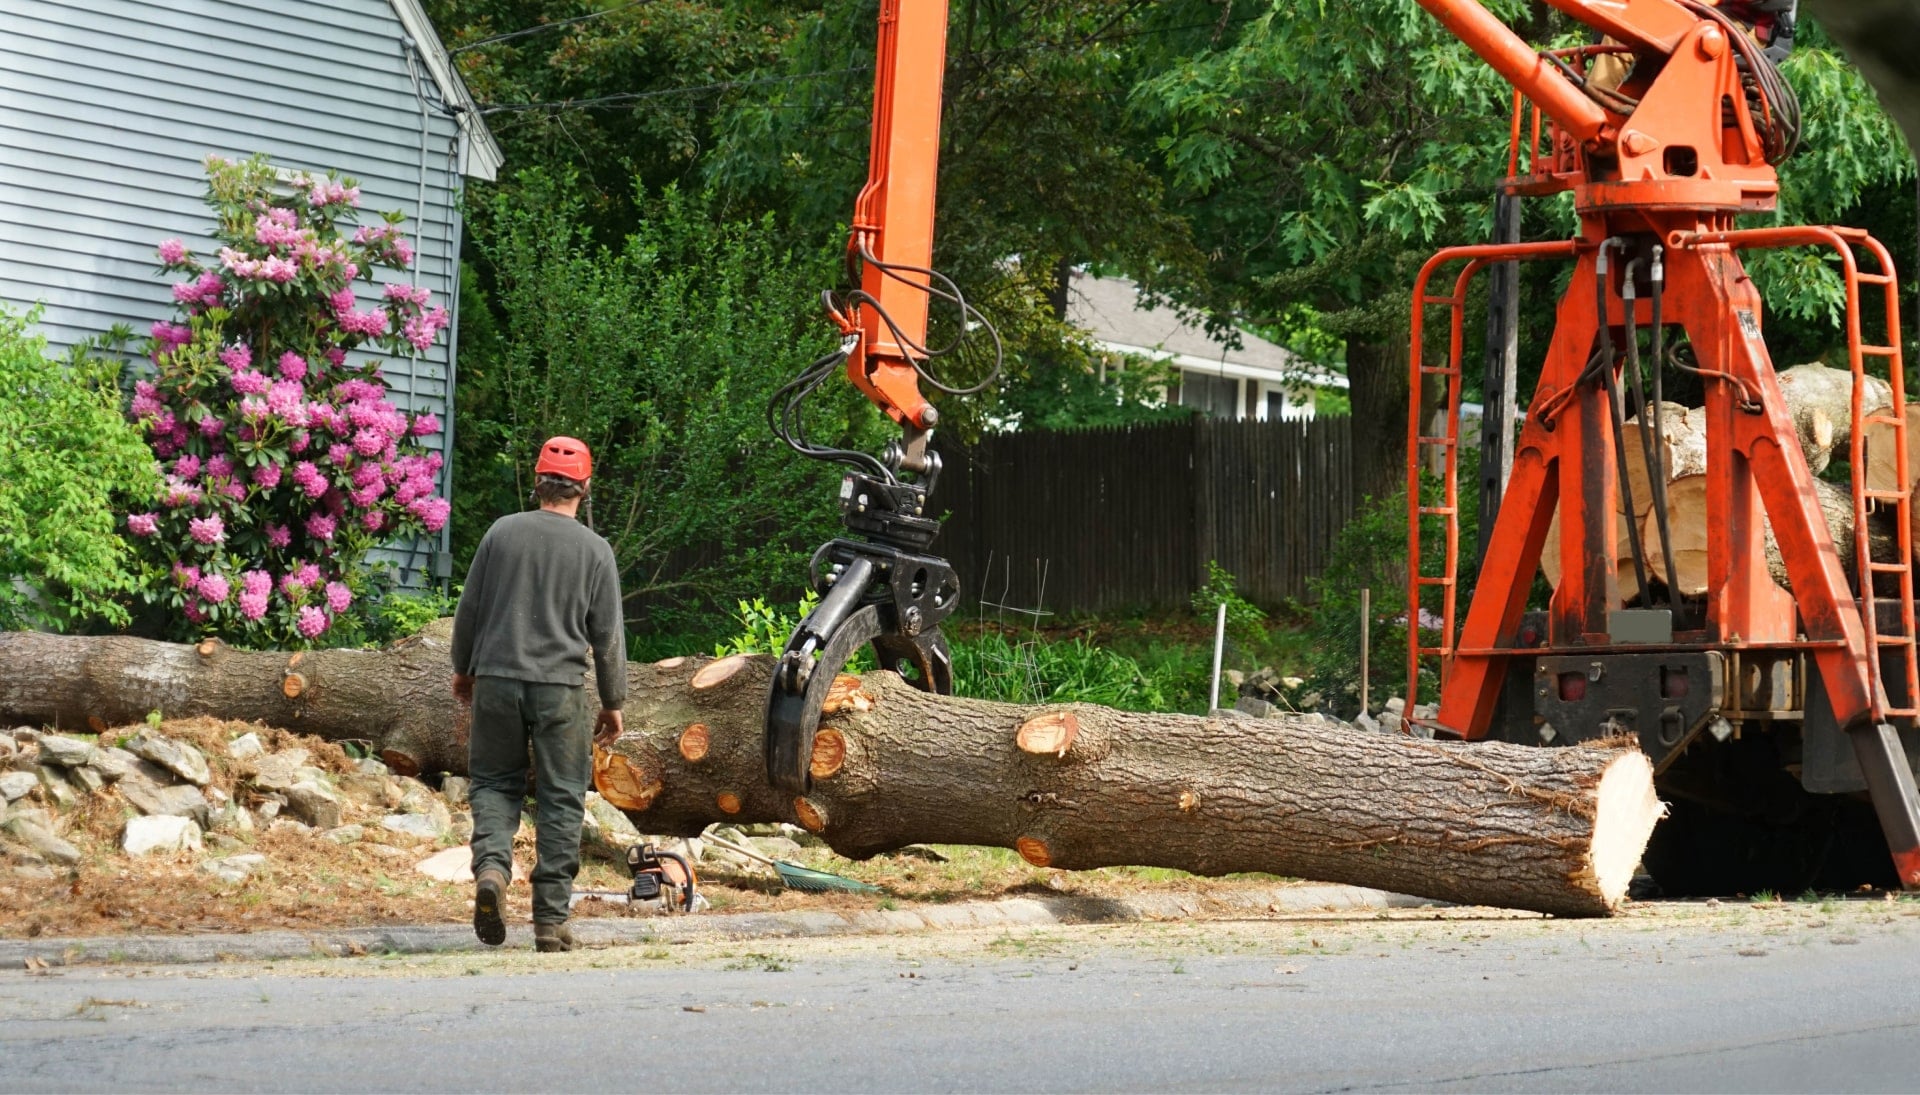 Heavy machinery is used to remove a tree after cutting in Minnetonka, MN.